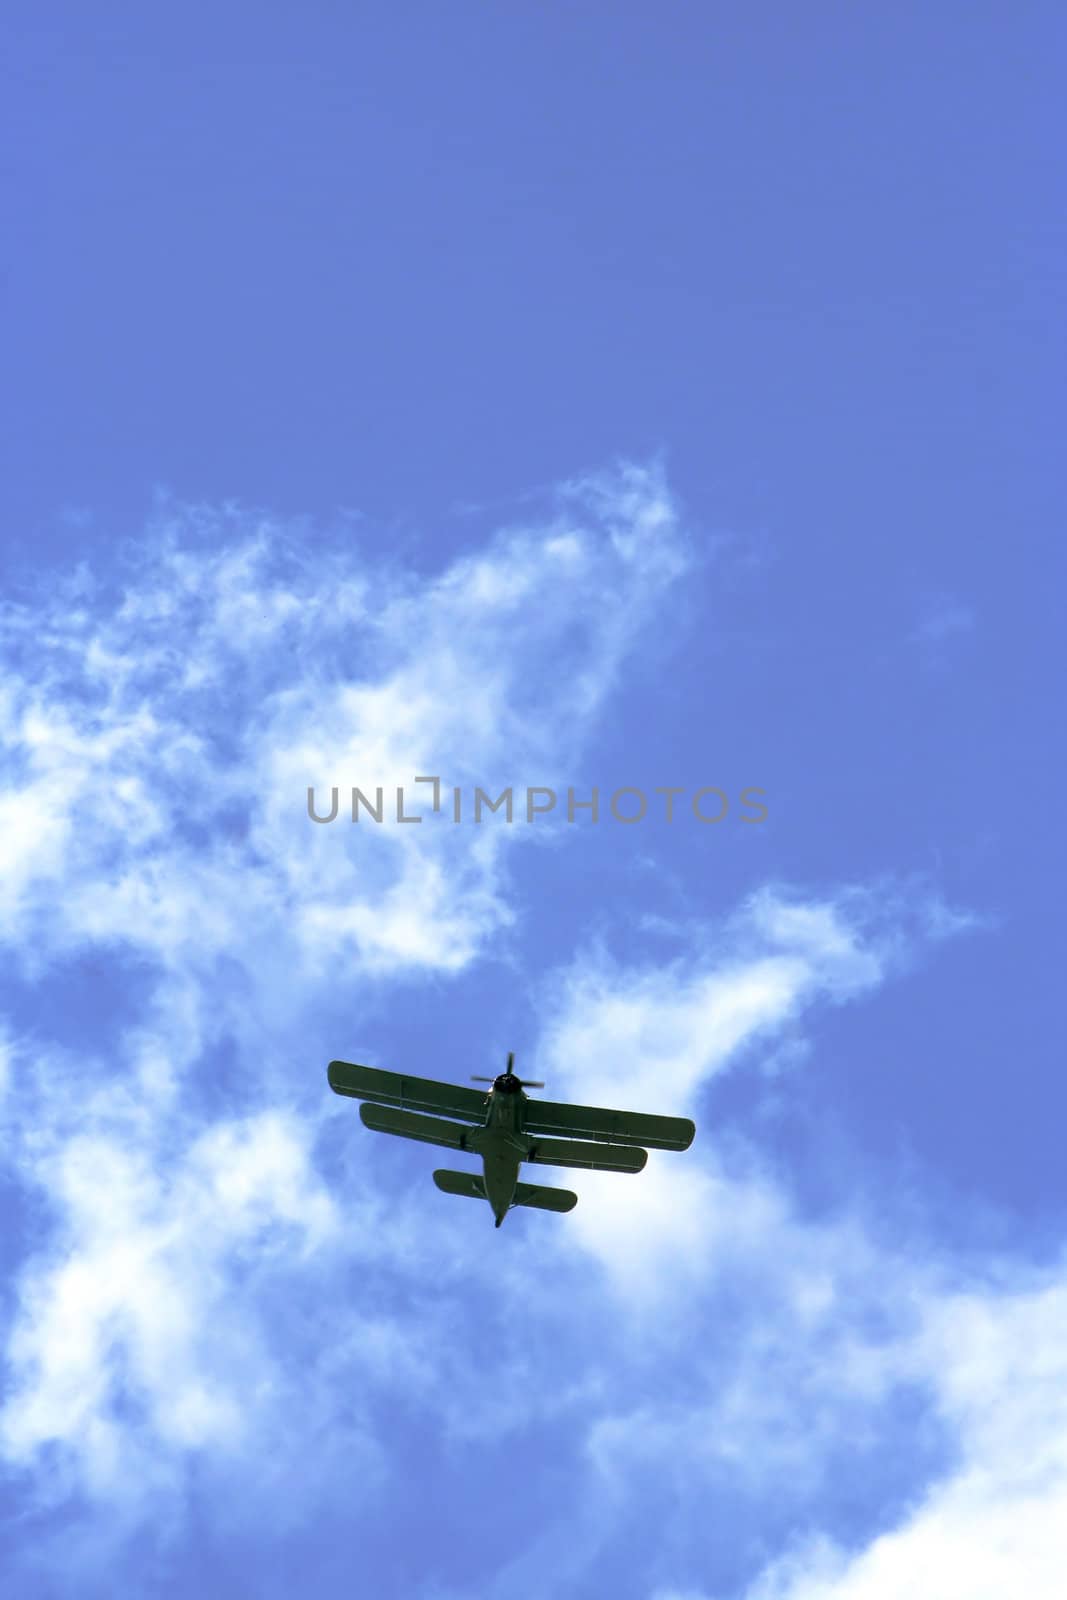 The plane on a background of the dark blue sky